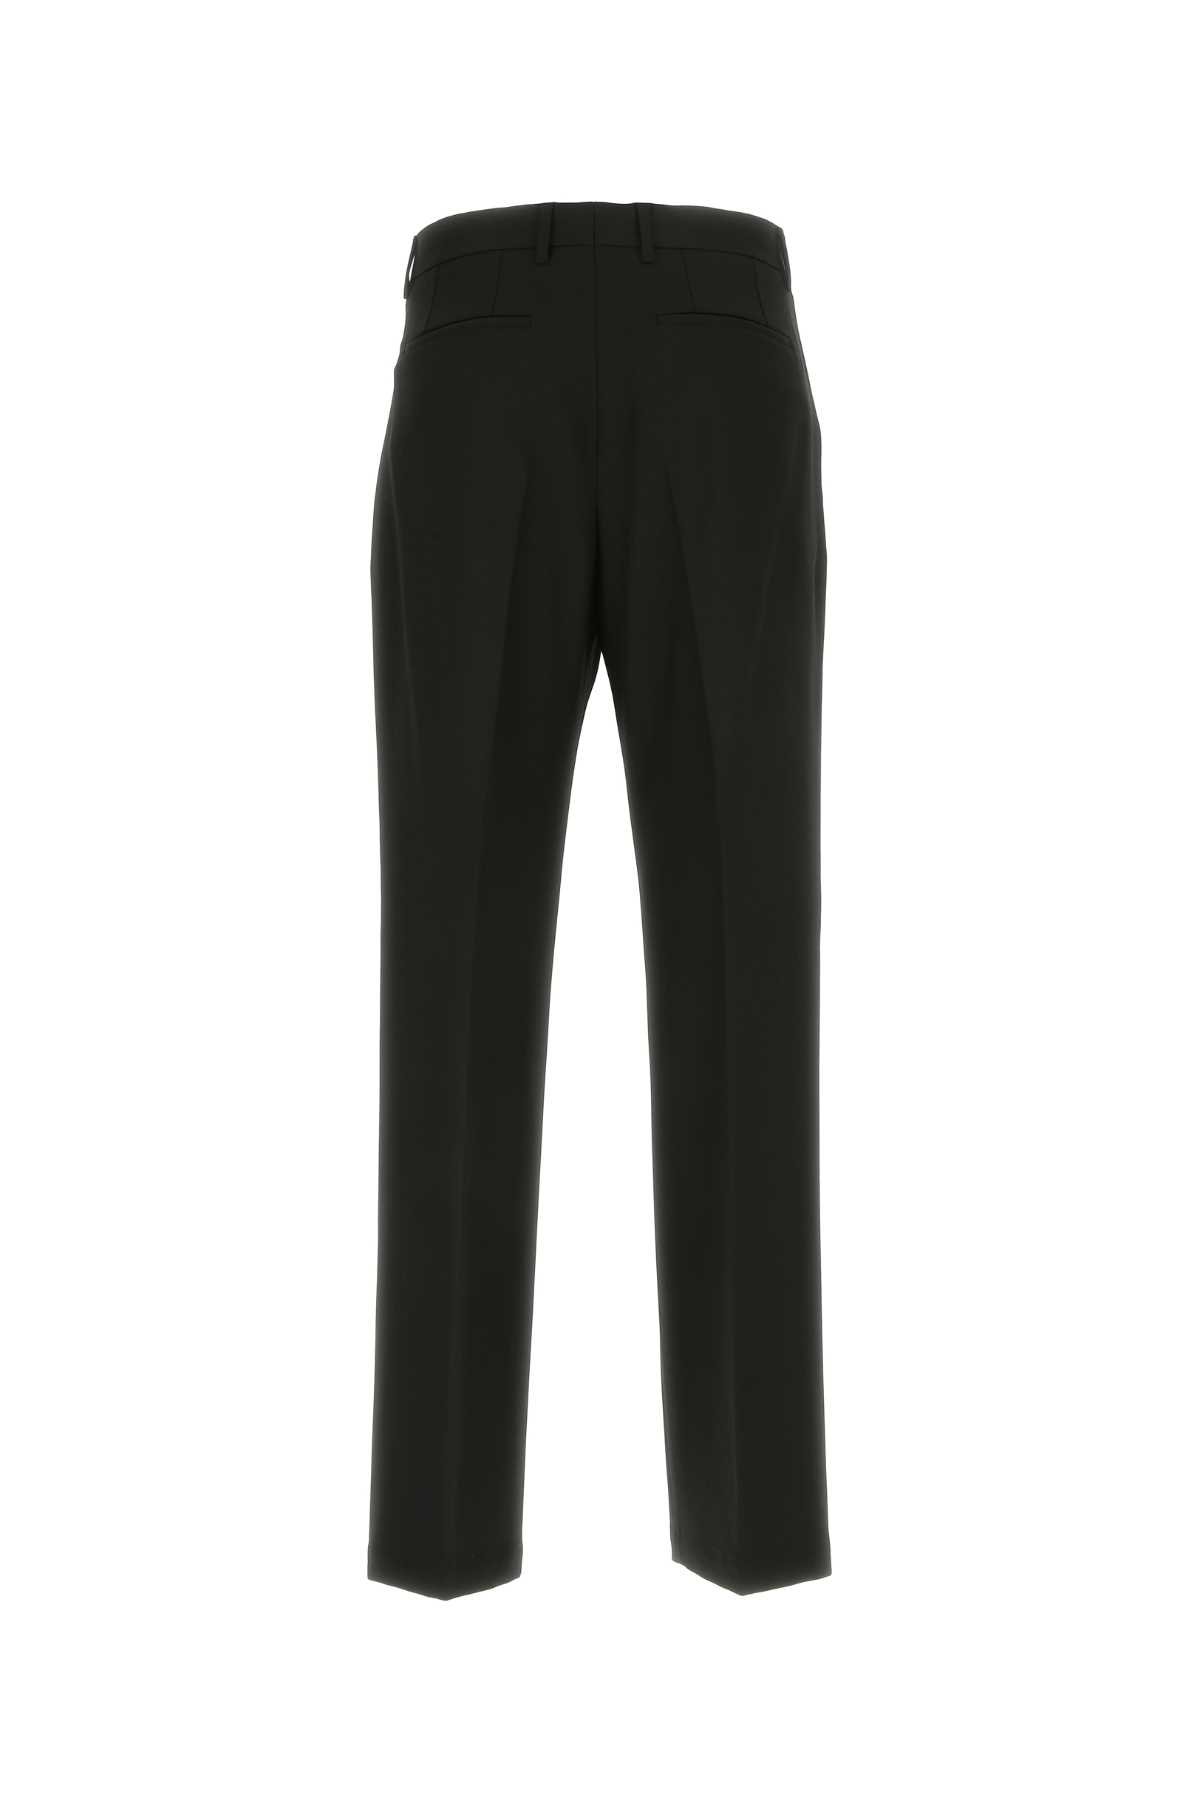 Burberry Black Wool Pant In A1189